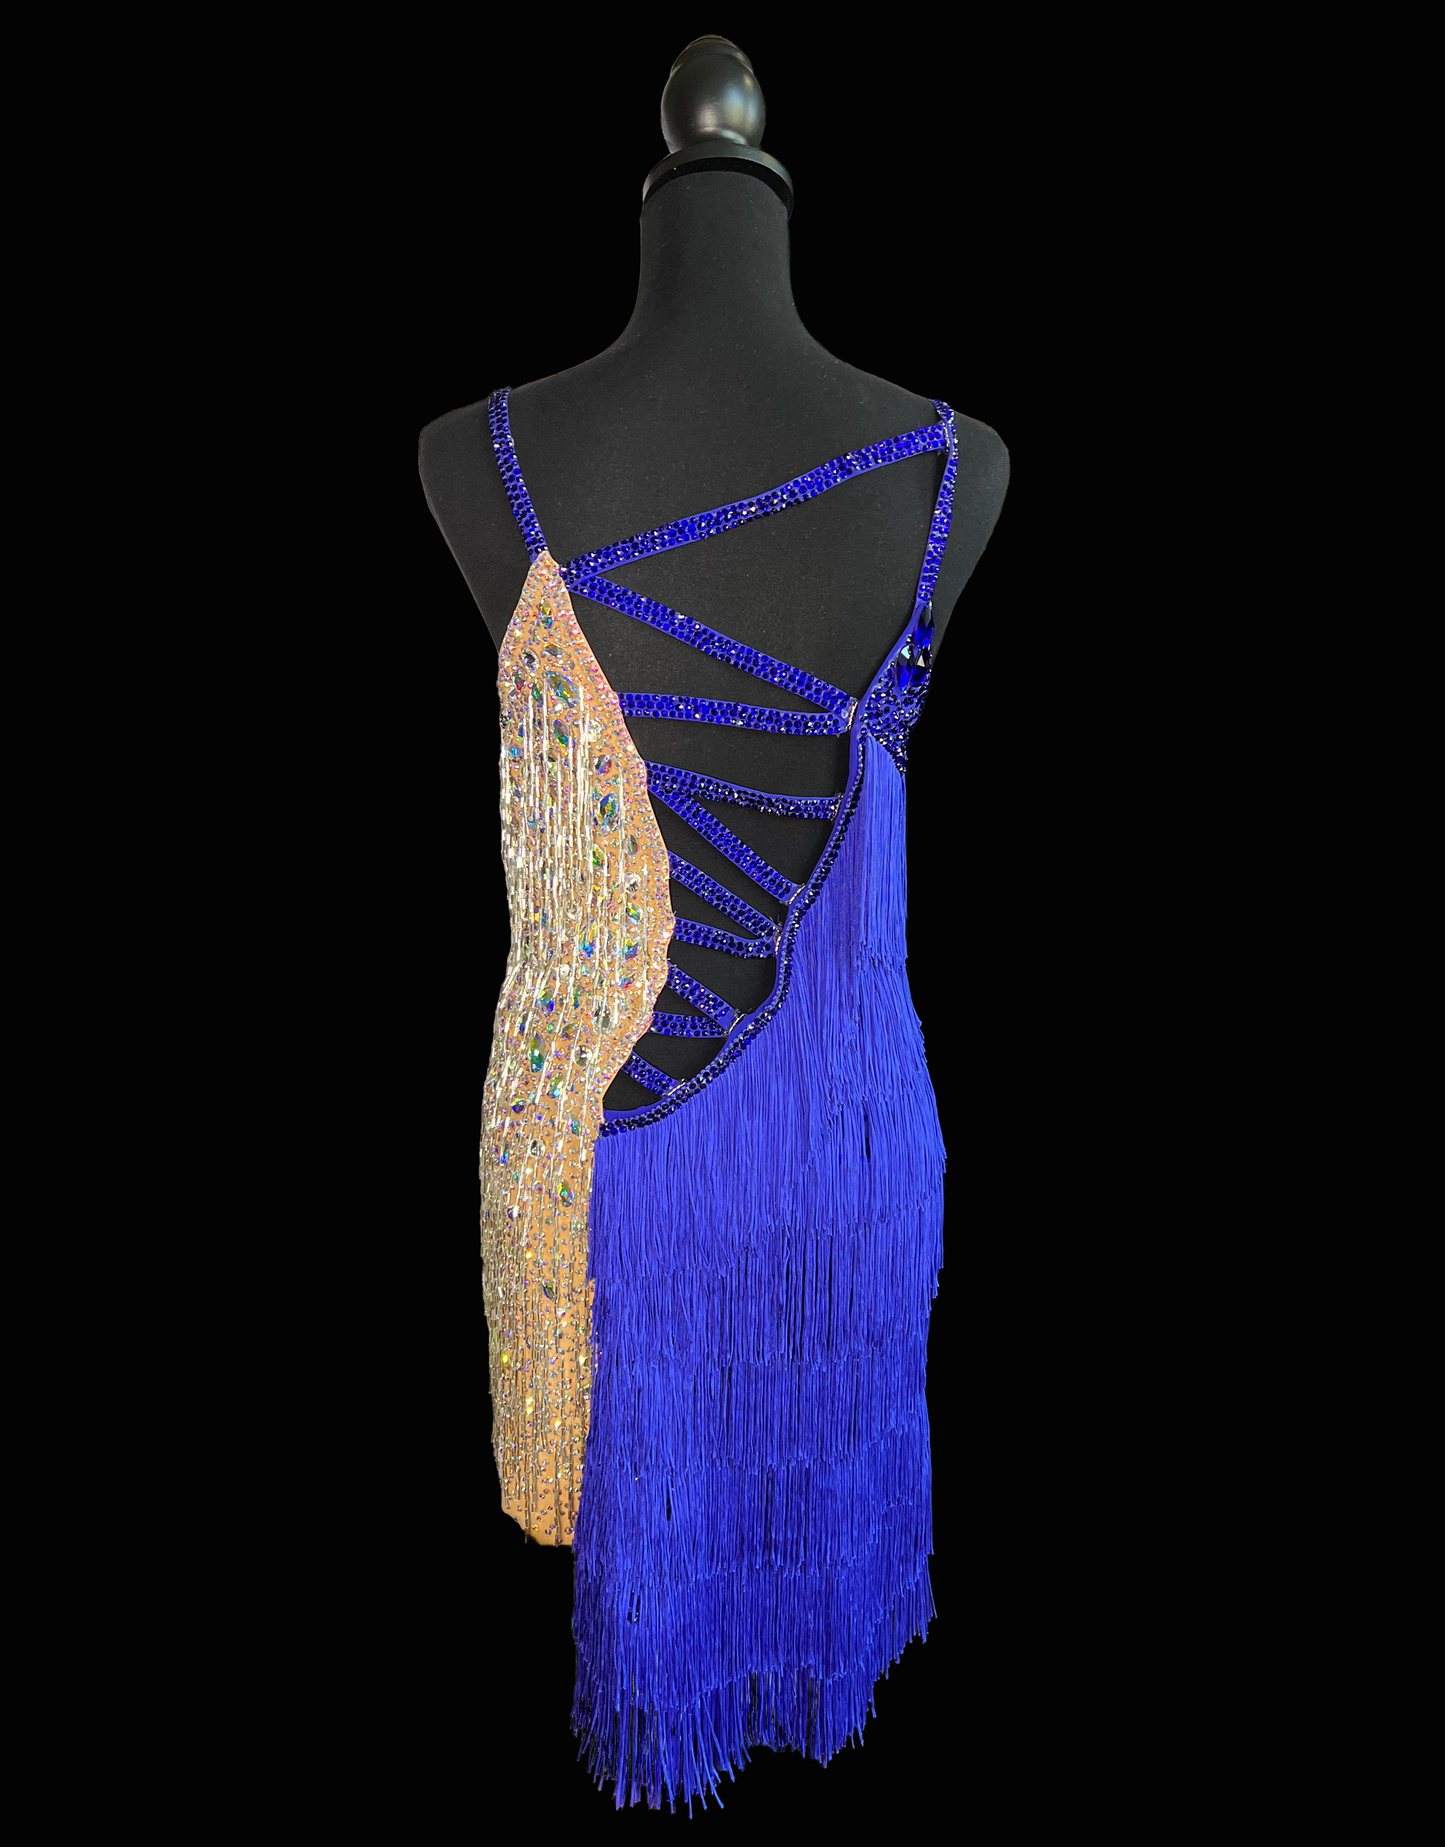 Resale Artistry in Motion Sleeveless Latin Dress with Cobalt Rows of Fringe and Tan Side with Broken Glass Effect Sz M Lat402